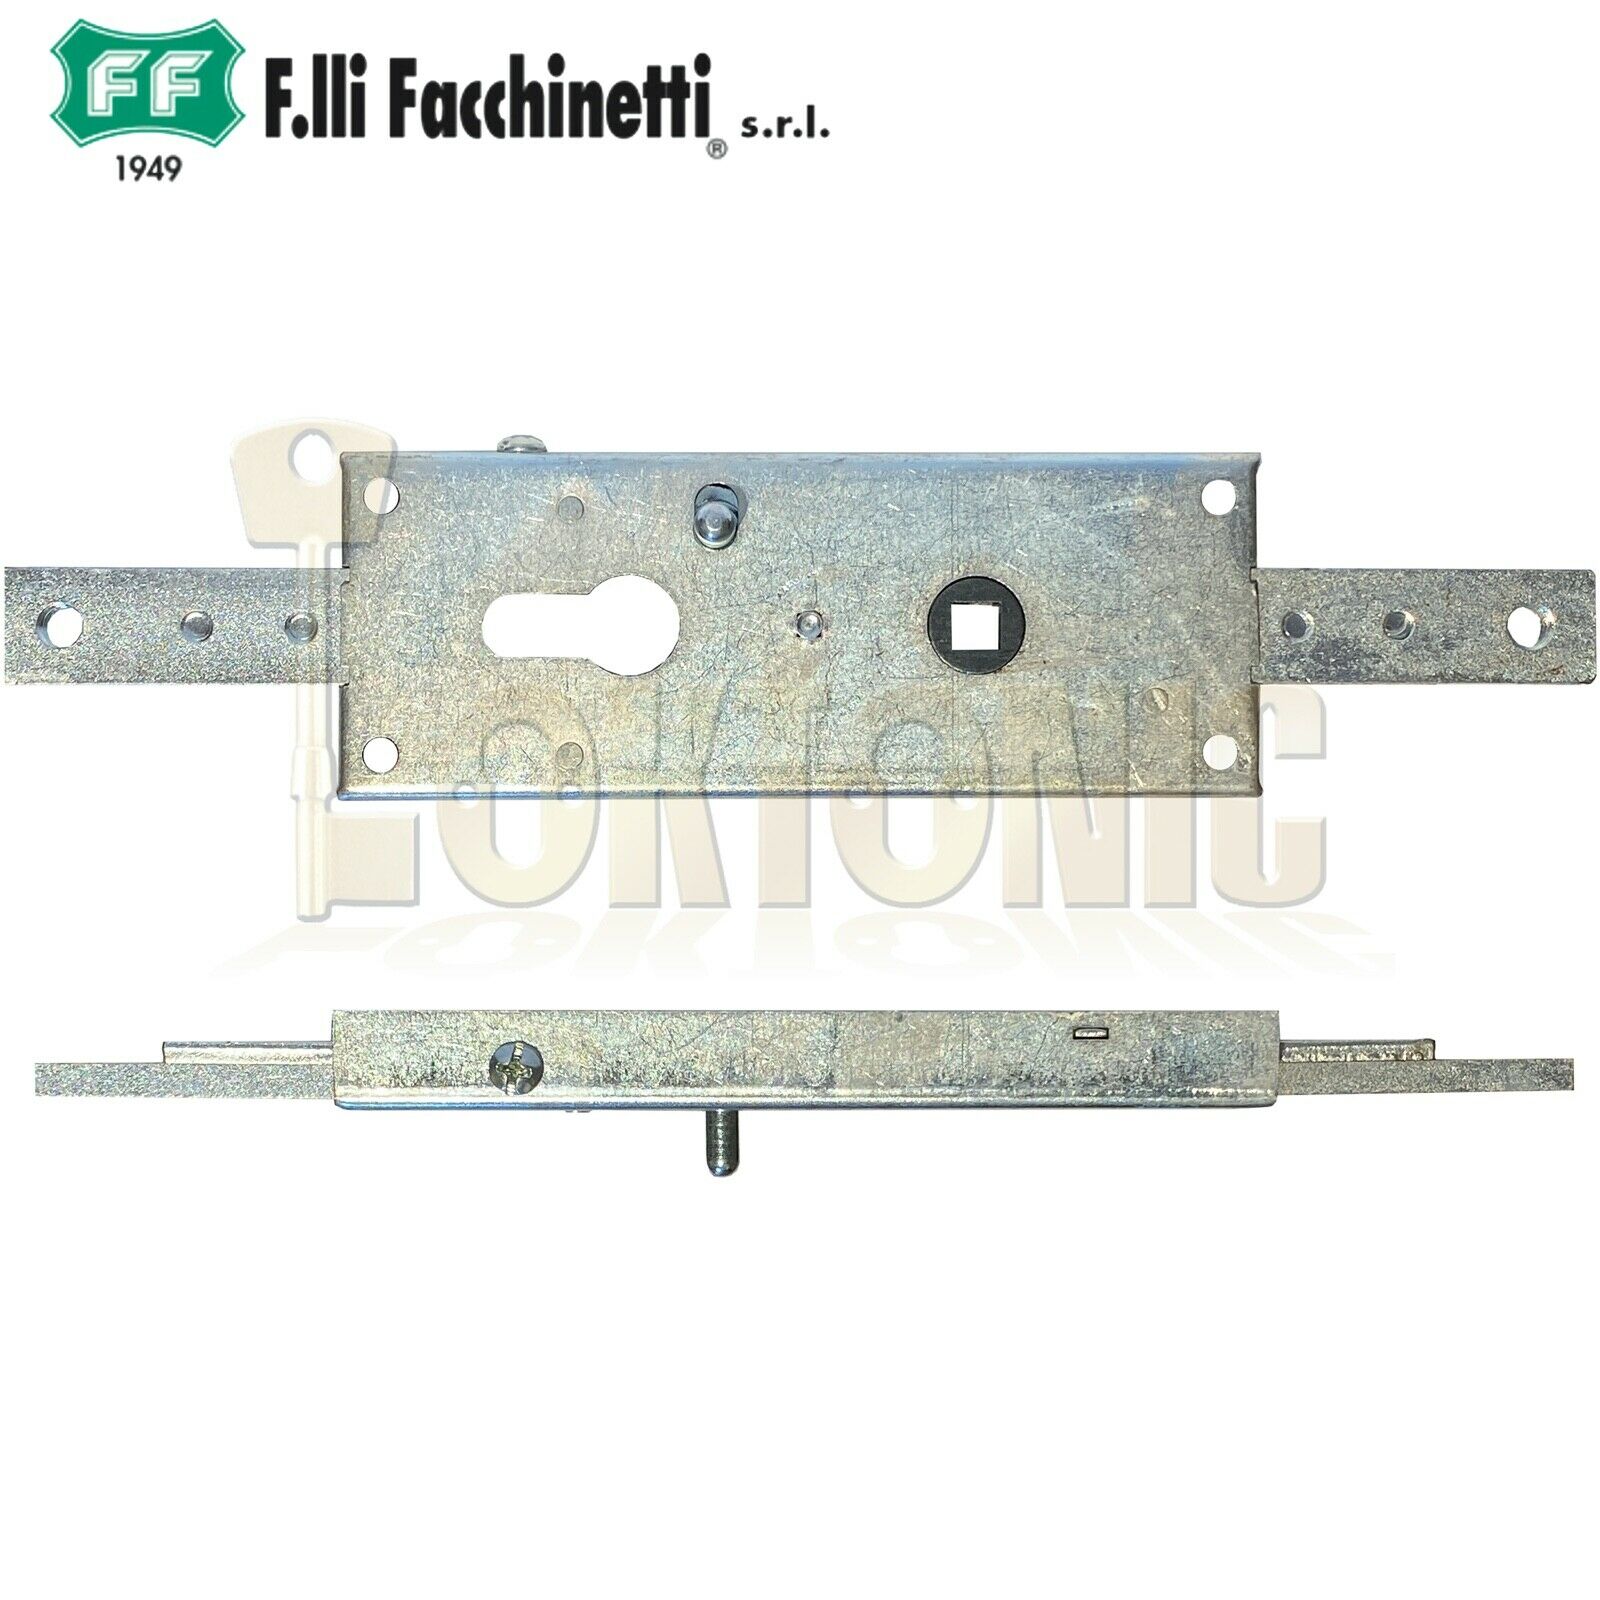 Facchinetti Euro Lockcase Up And Over Garage Door Lock Unlock Lever 8mm Spindle Loktonic